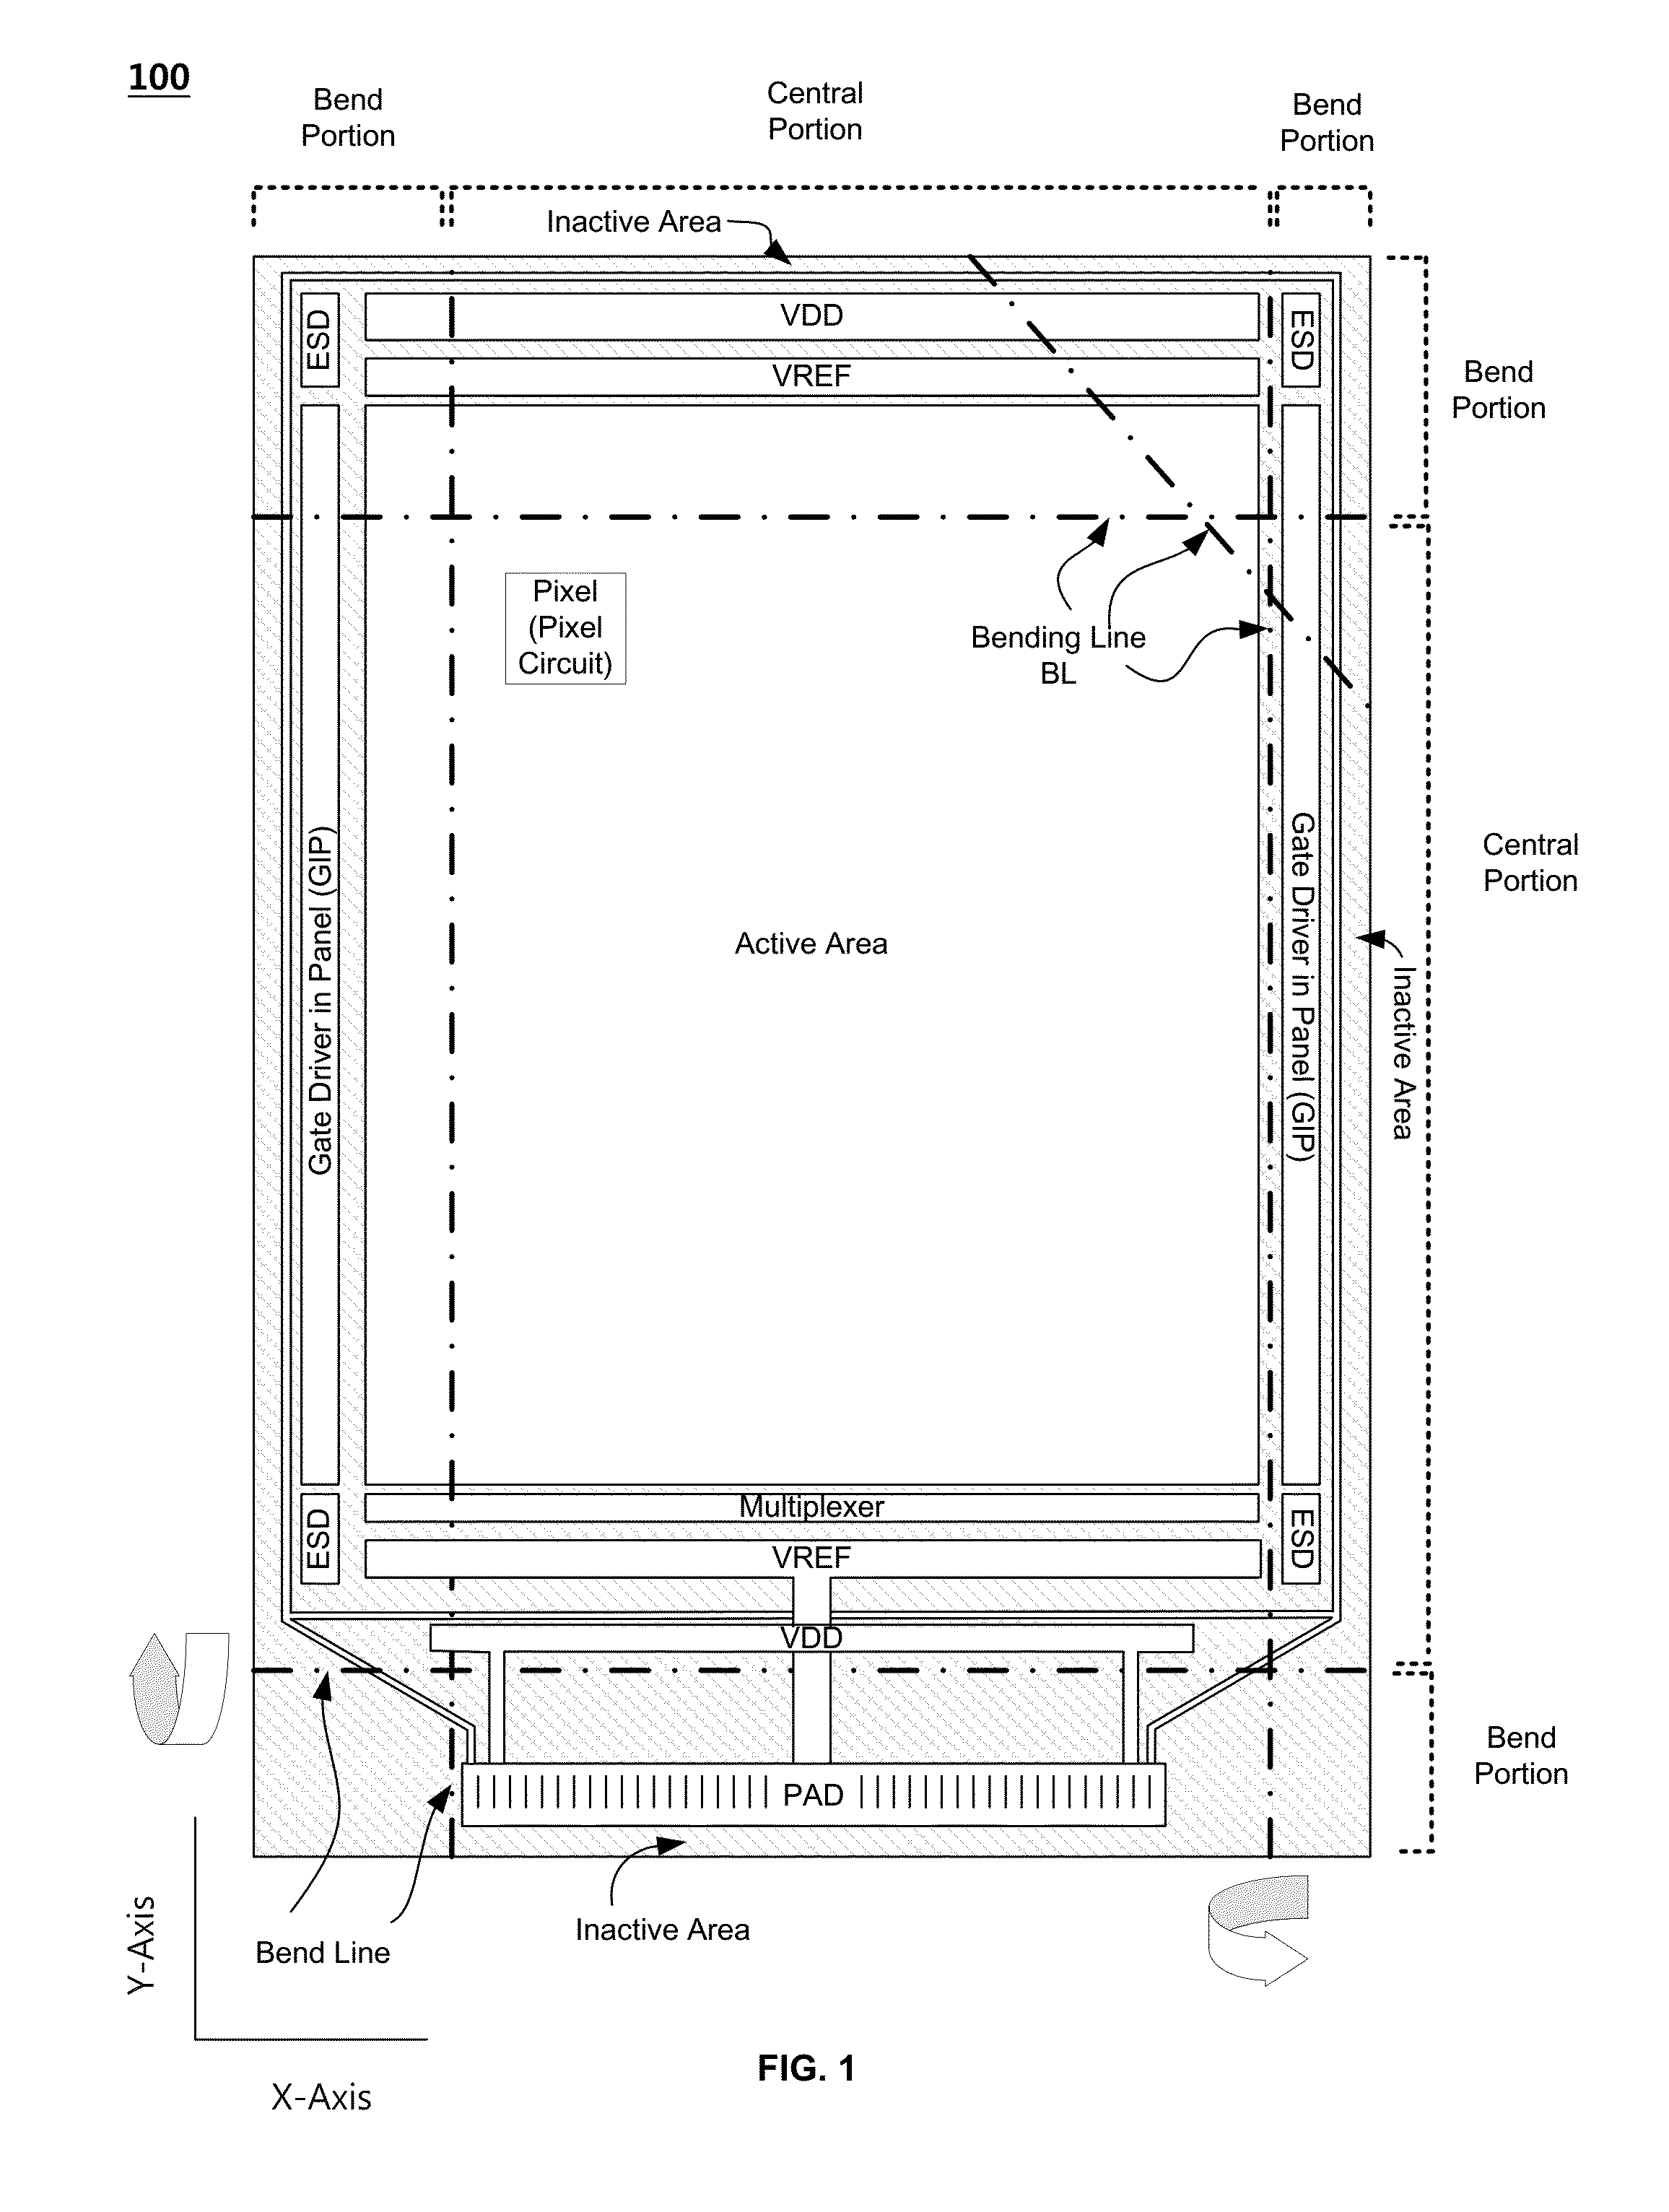 Flexible display device with corrosion resistant printed circuit film